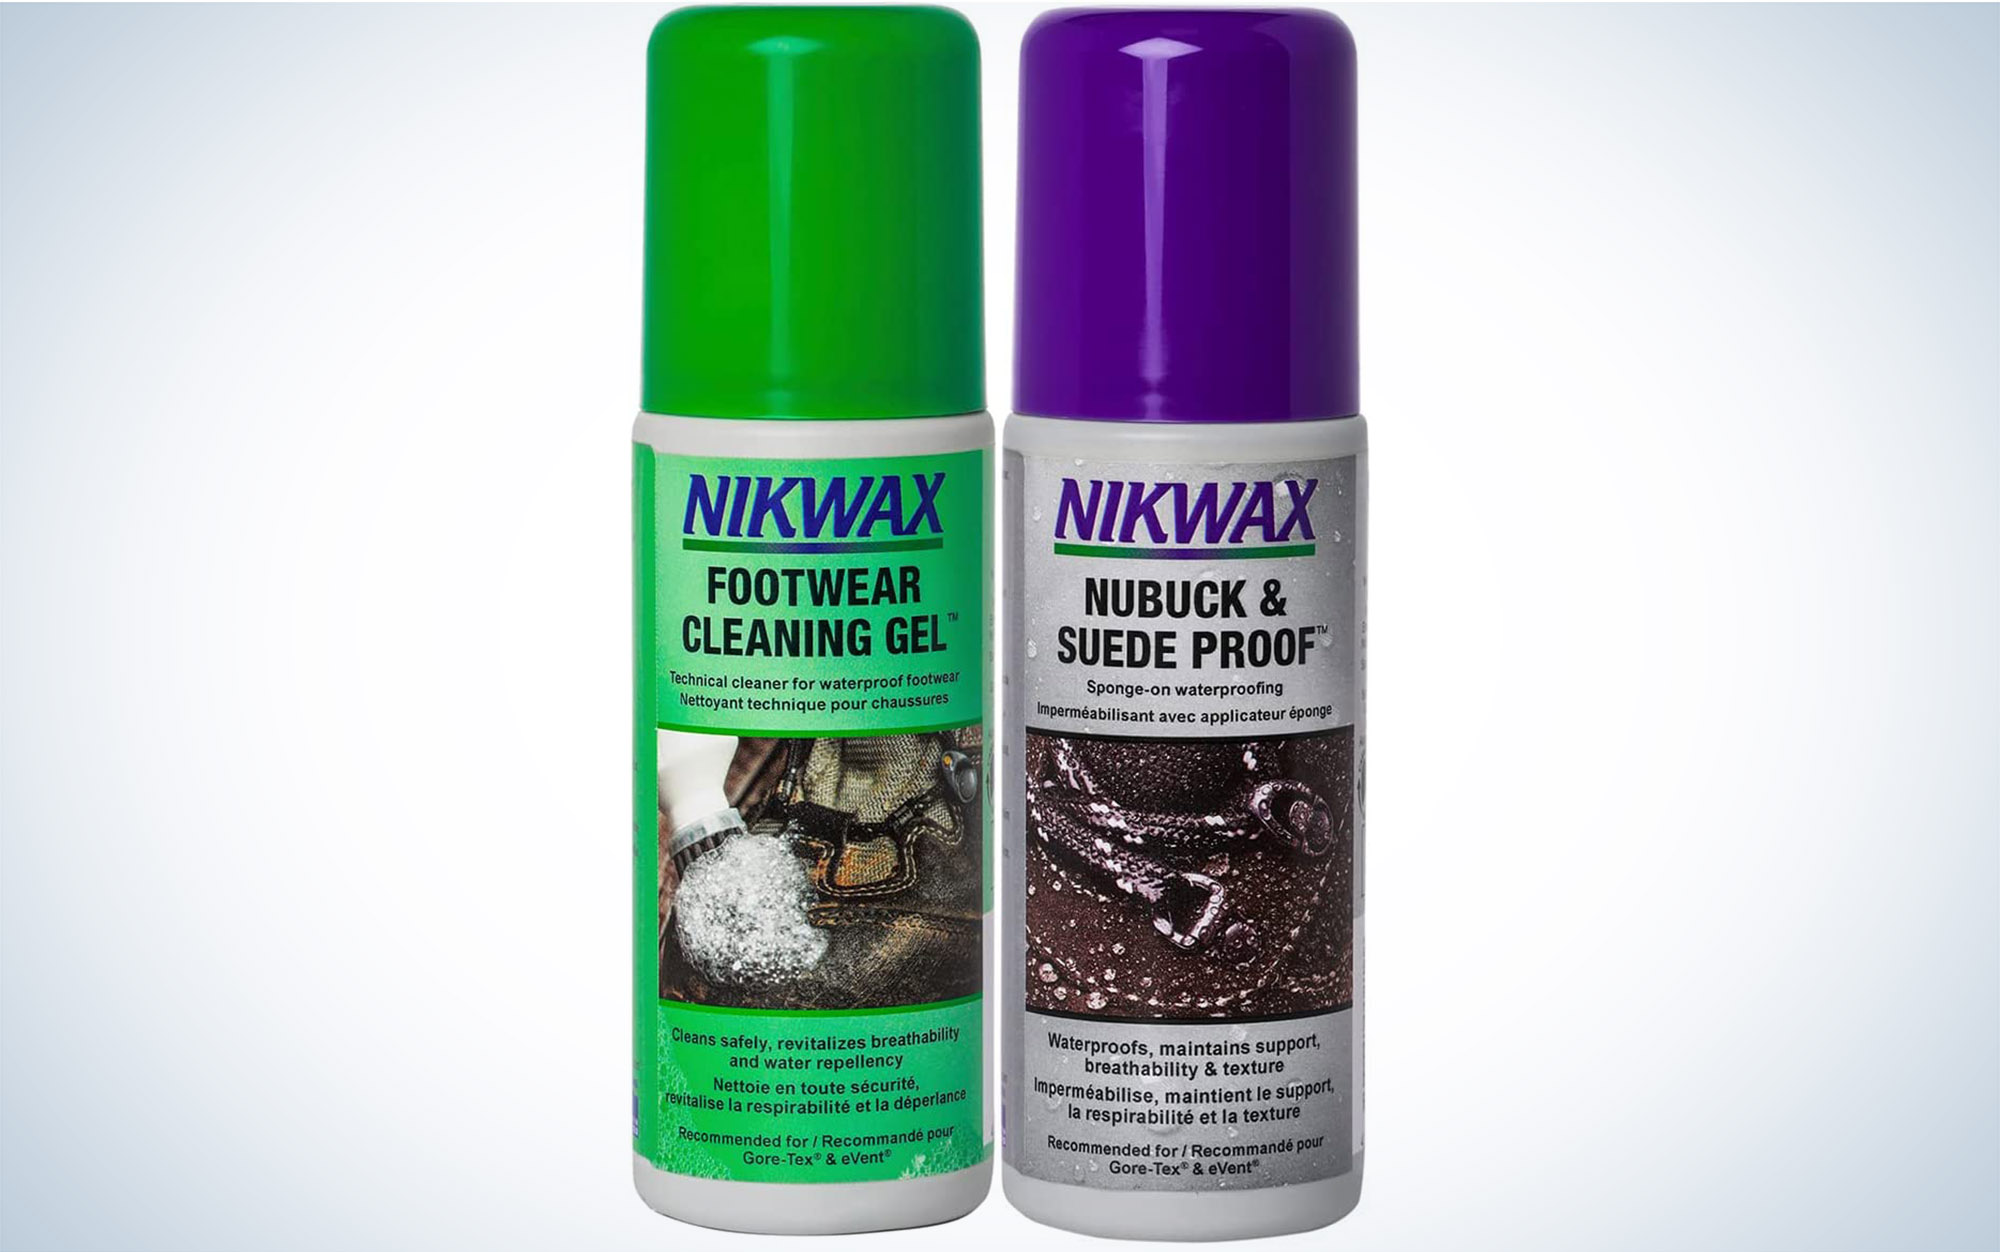 We tested the Nikwax Nubeck & Suede Proof.